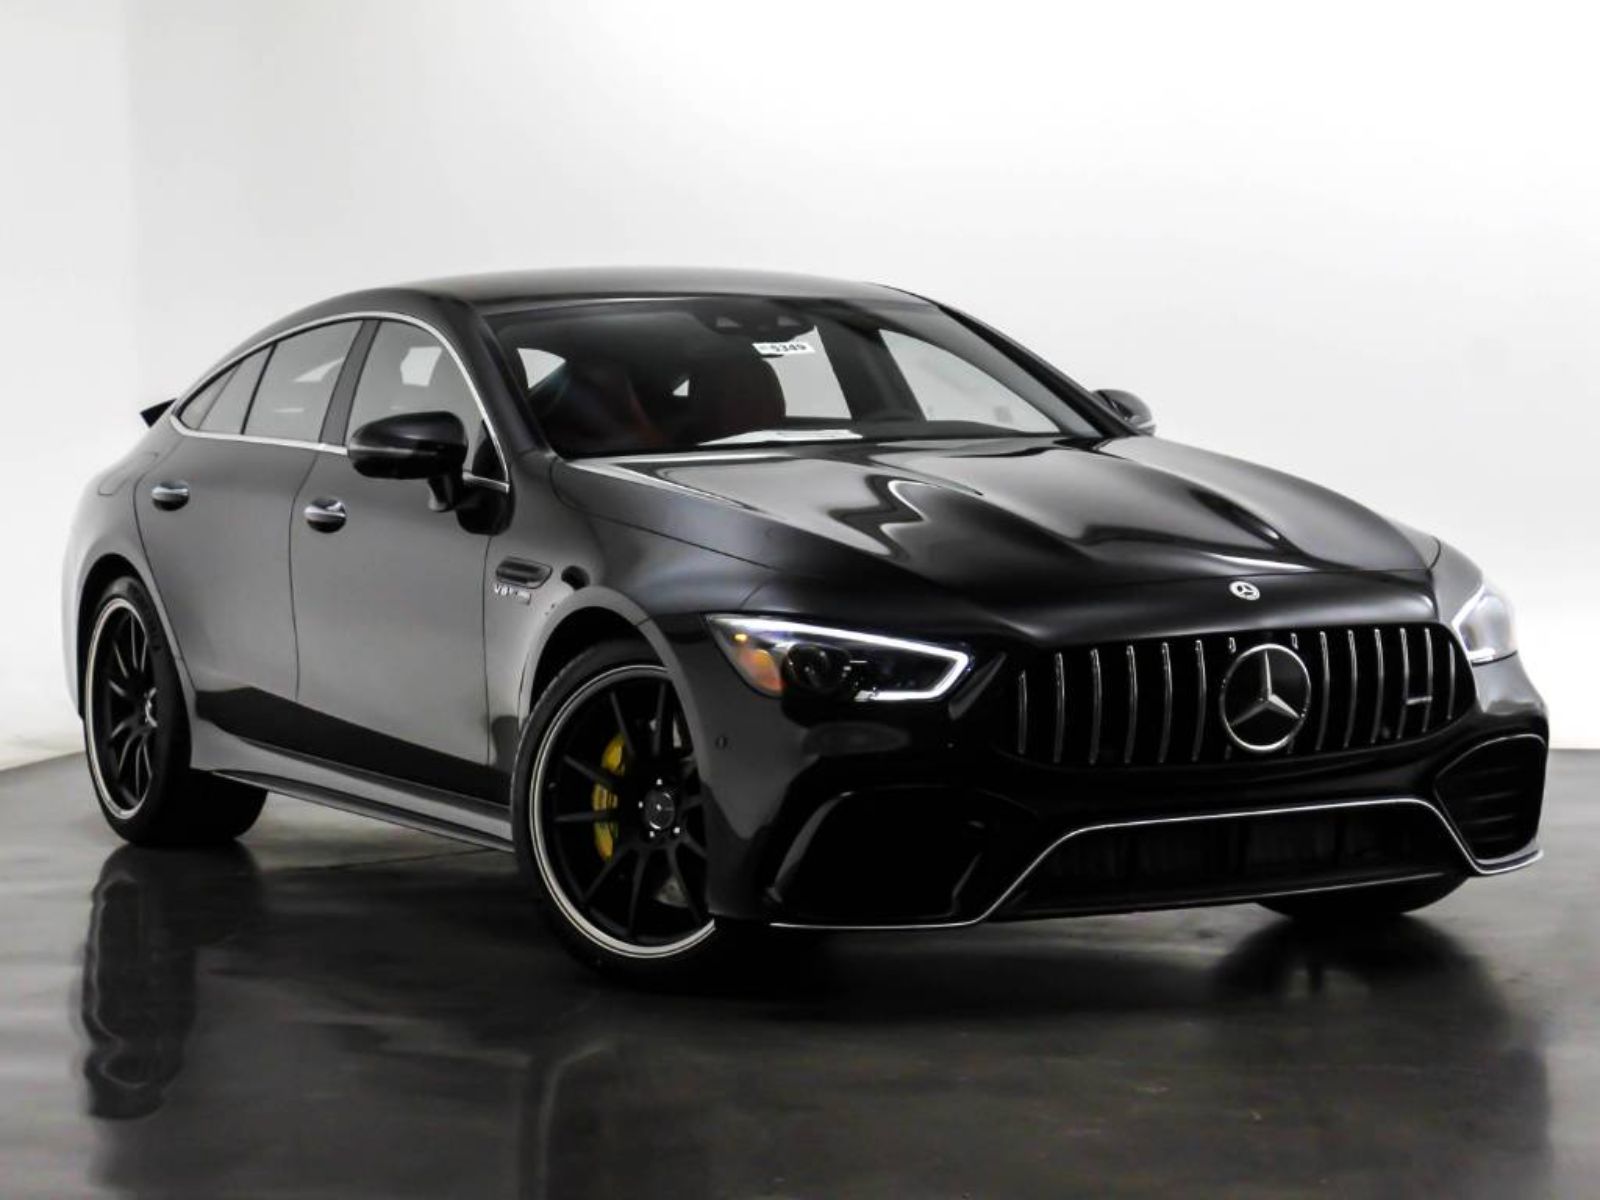 Compare Best Prices on the 2021 Mercedes amg Gt 63 S 4matic 